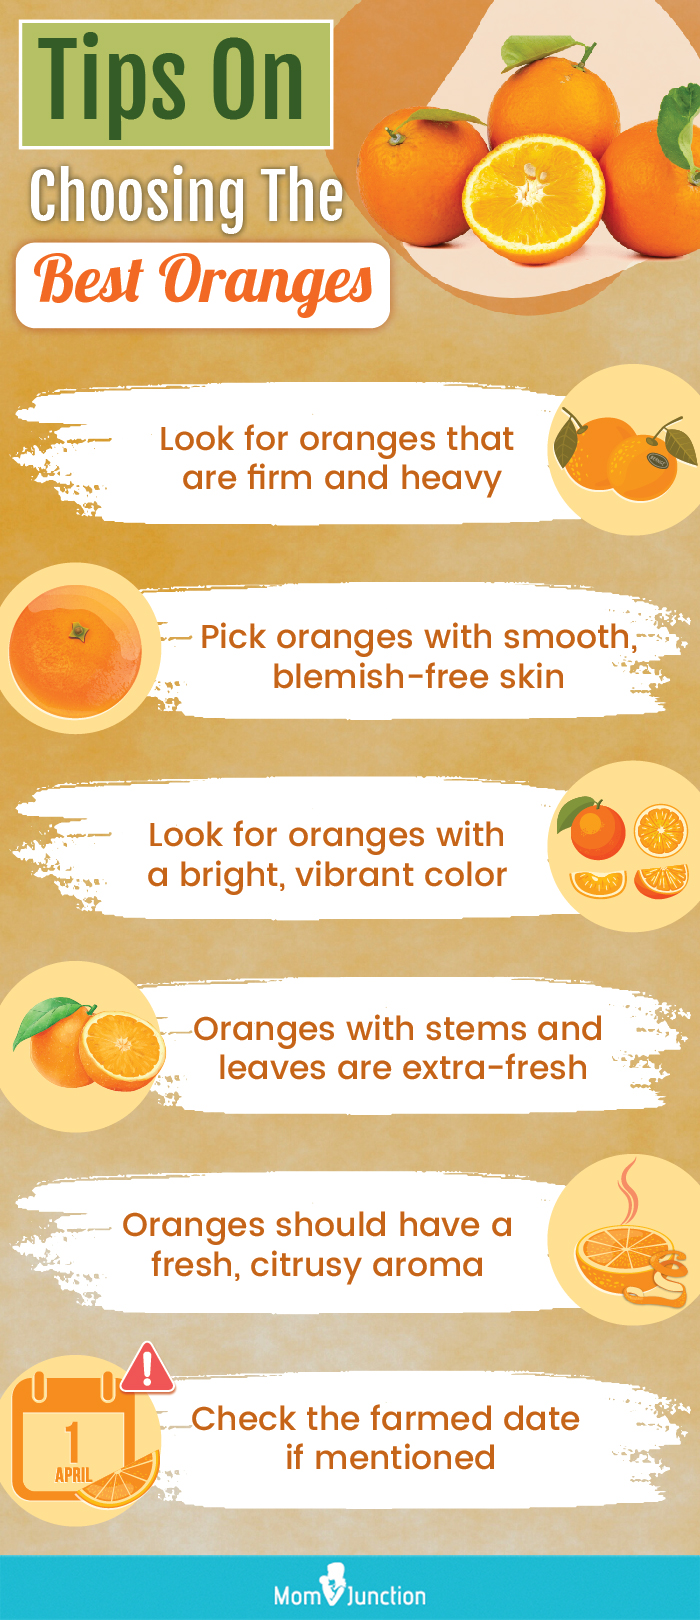 tips on choosing the best oranges (infographic)